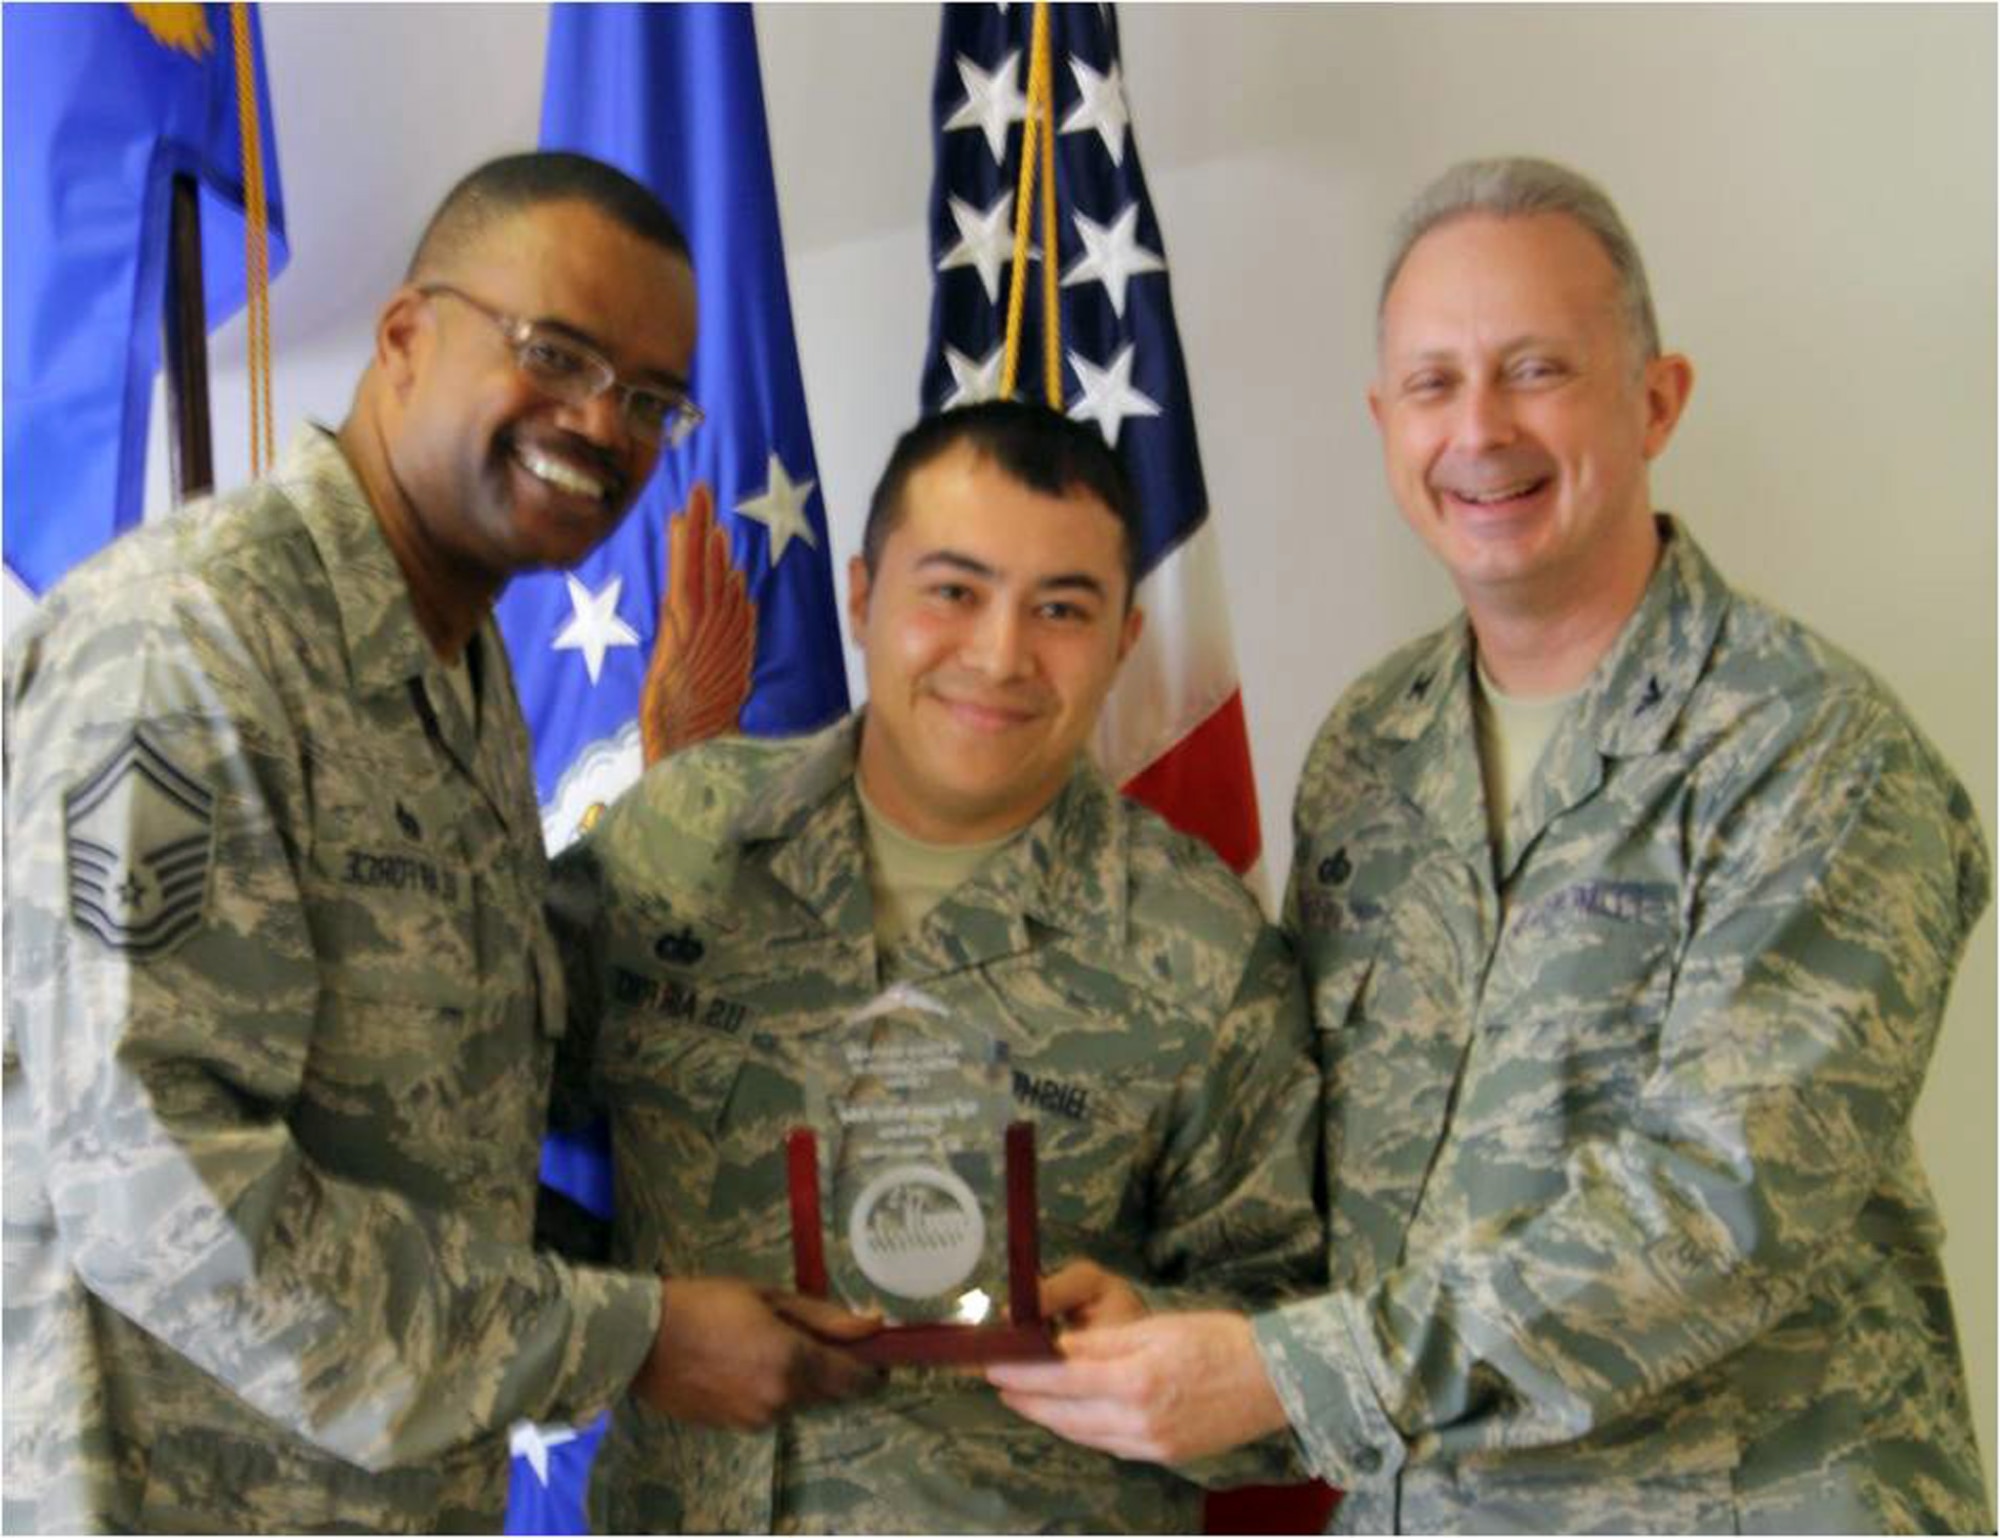 DOVER AIR FORCE BASE, Del.- Staff Sgt. Michael Bishop, center, a Services specialist with the 446th Services Flight, McChord Air Force Base, Wash., accepts his NCO of the Rotation Award from Senior Master Sgt. Stephen Harris, left, 446th SVF superintendent, and Col. Robert Edmondson, commander, Air Force Mortuary Affairs Operations Center here for his hard work and selfless service during his air expeditionary force rotation at AFMAOC. (U.S. Air Force photo/Capt. Sandra Bannan)